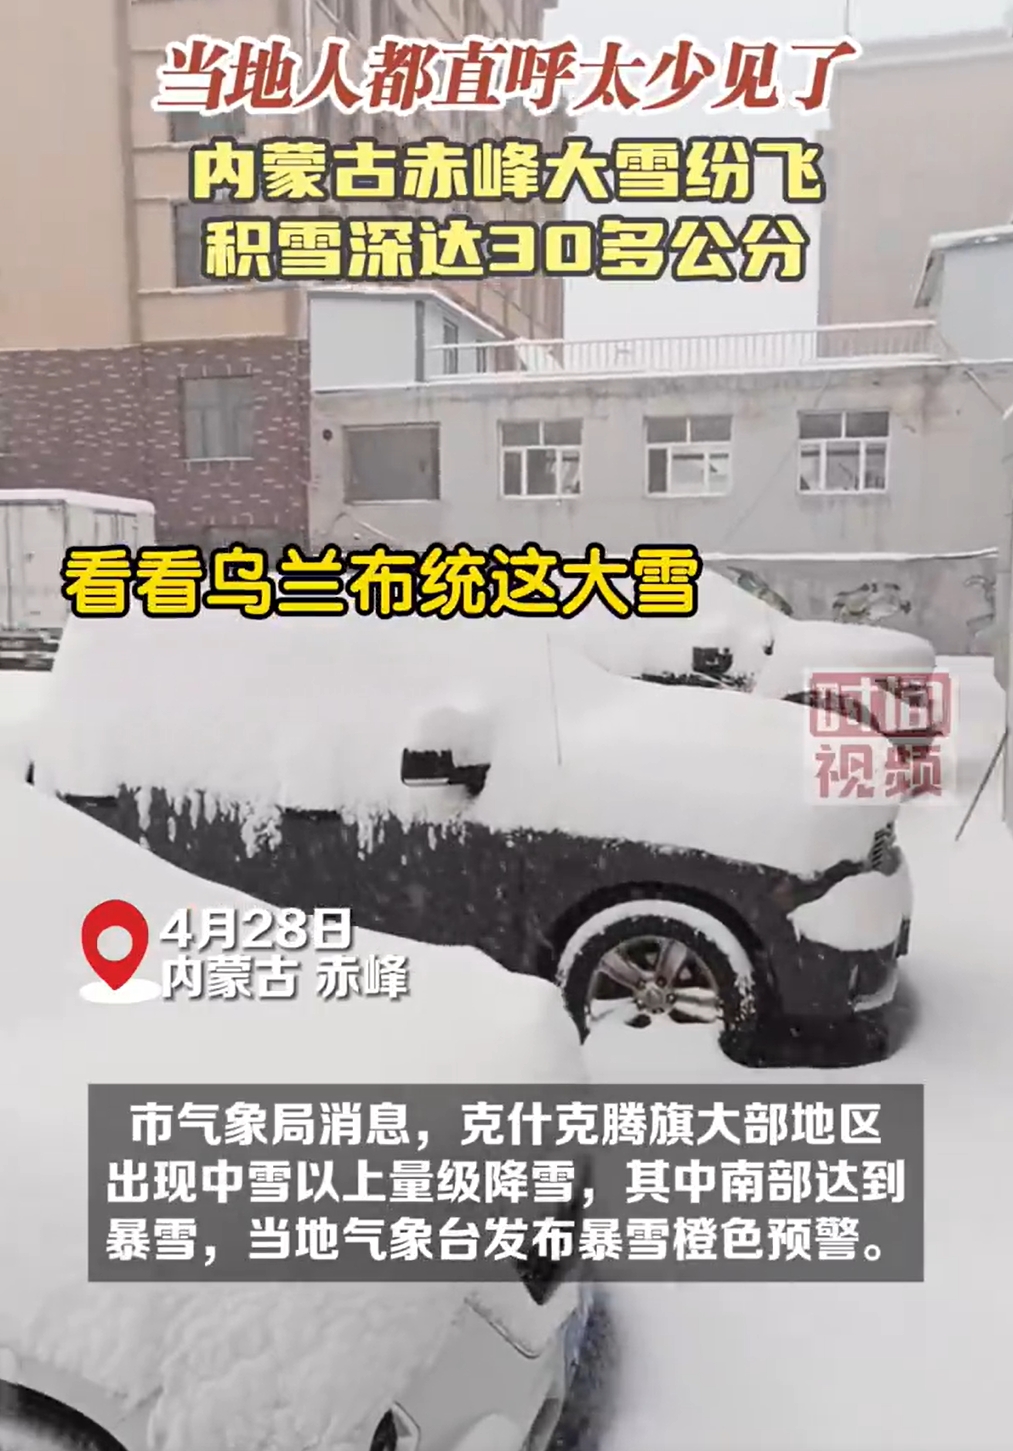 <strong>内蒙古突降大雪 送娃半路接停课通知</strong>